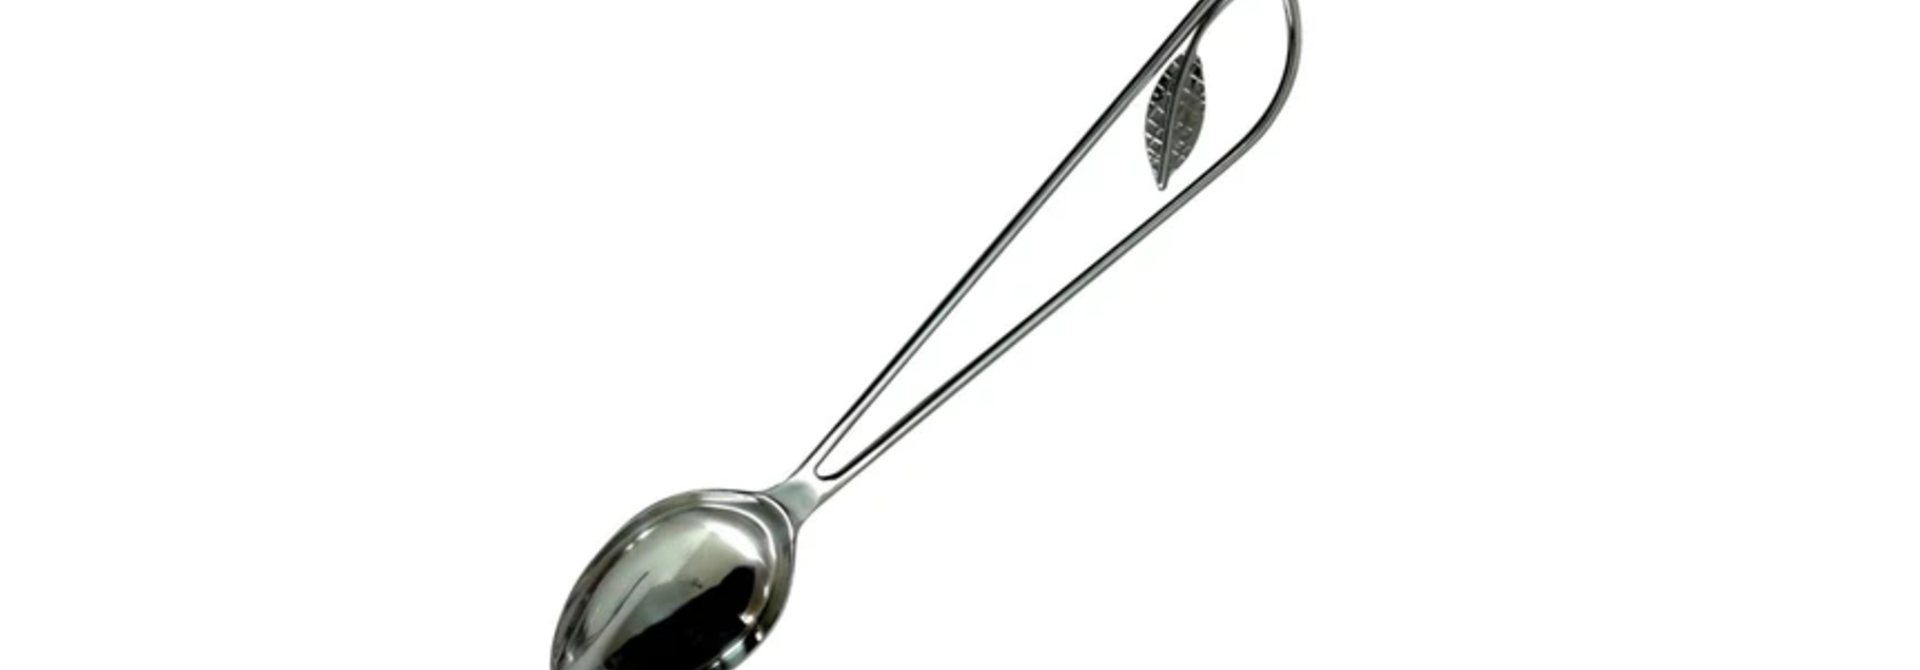 Catering Spoon